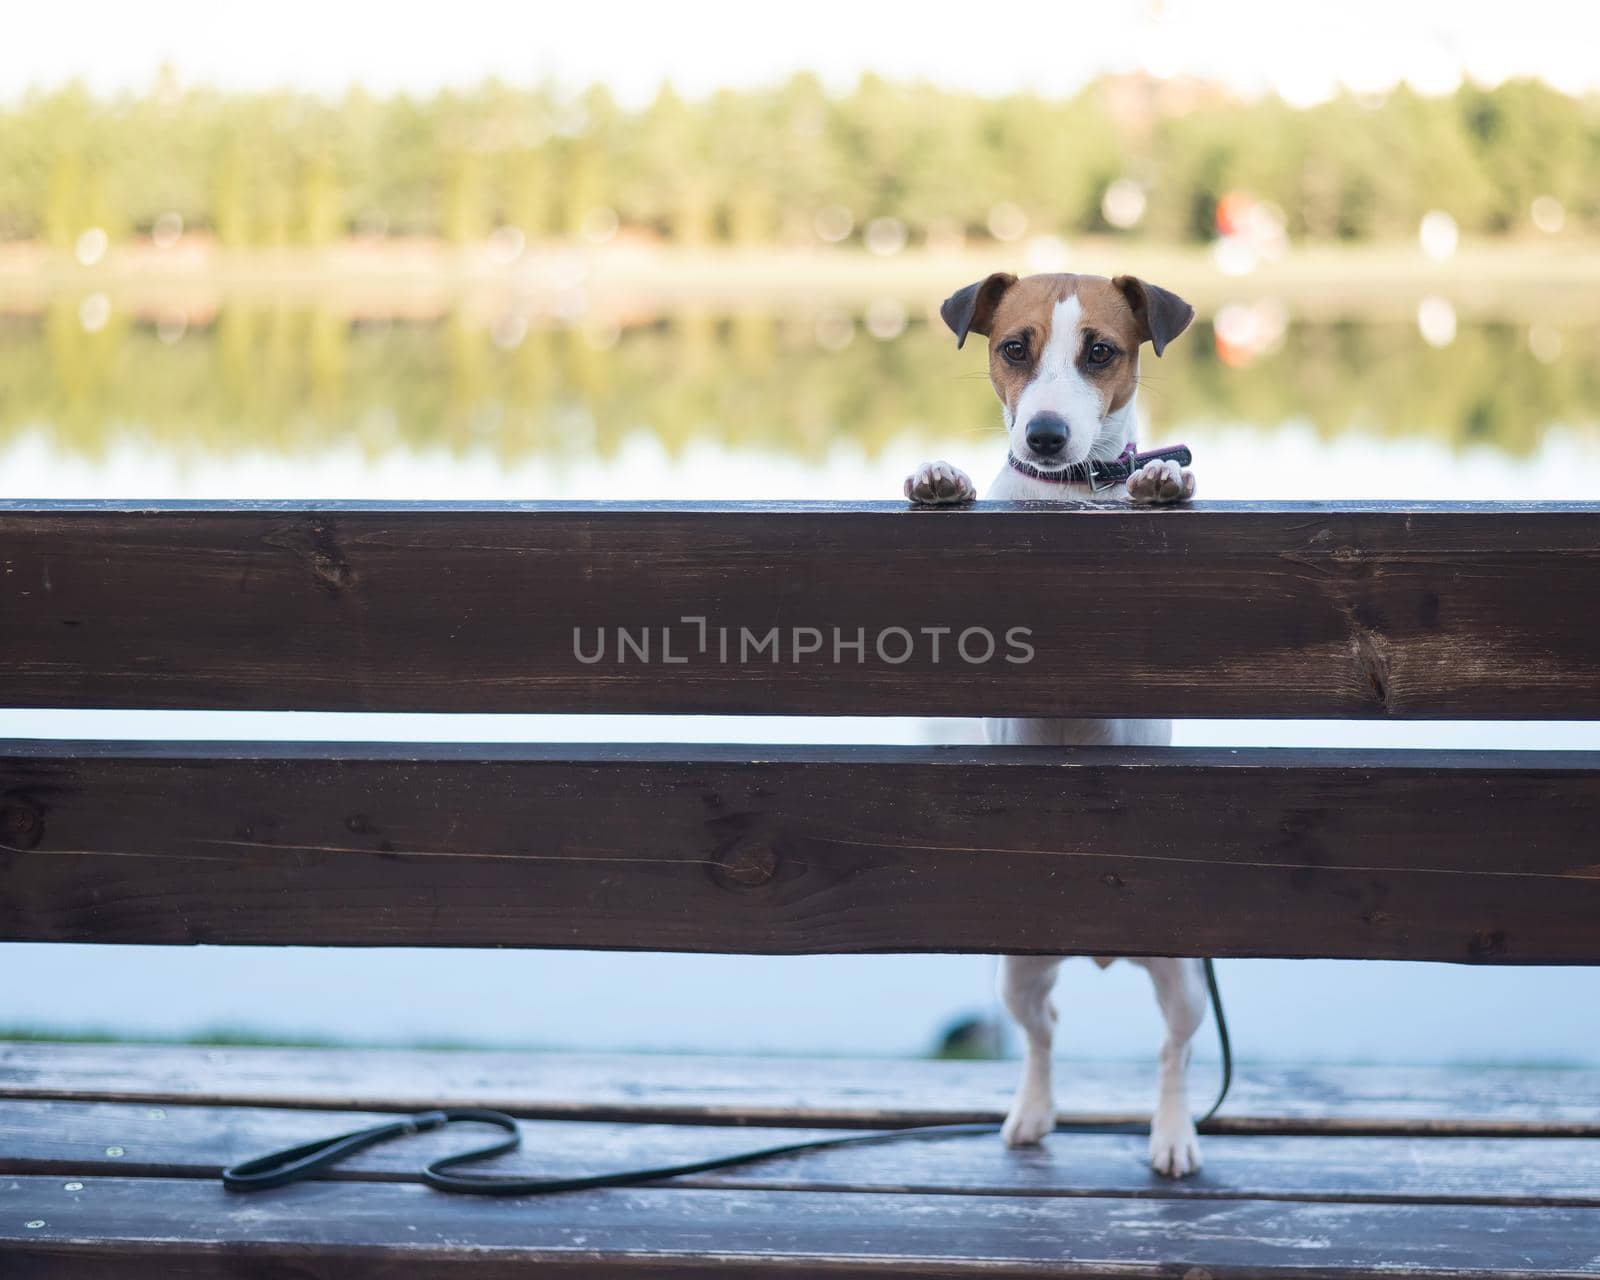 Lonely dog on a bench by the lake. by mrwed54